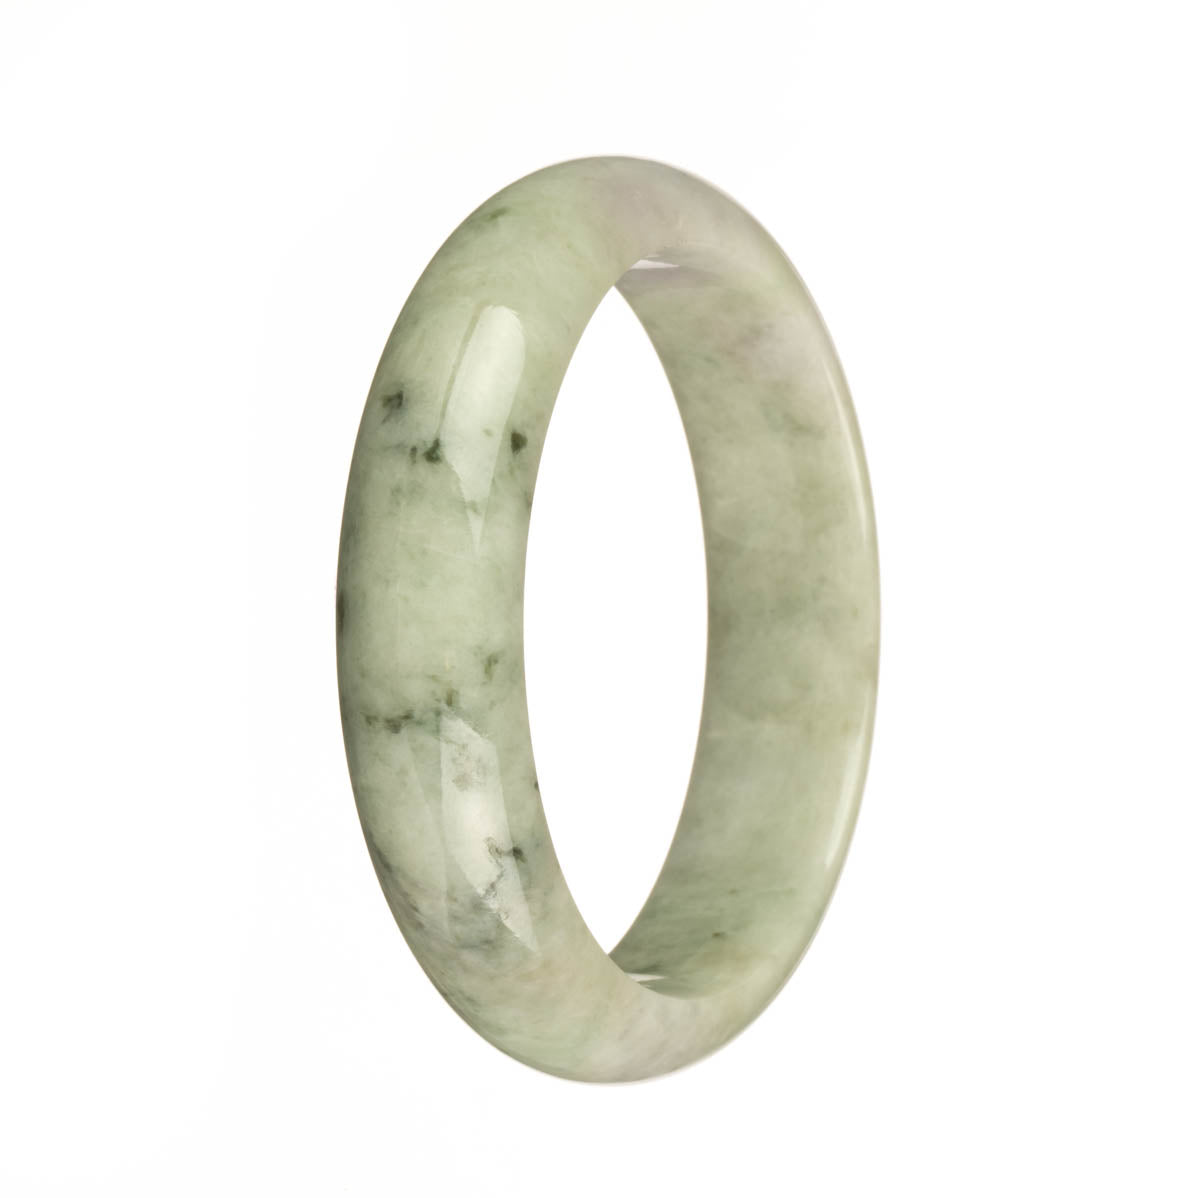 A pale green and white jade bangle with dark green patterns, in a half moon shape, measuring 59mm.